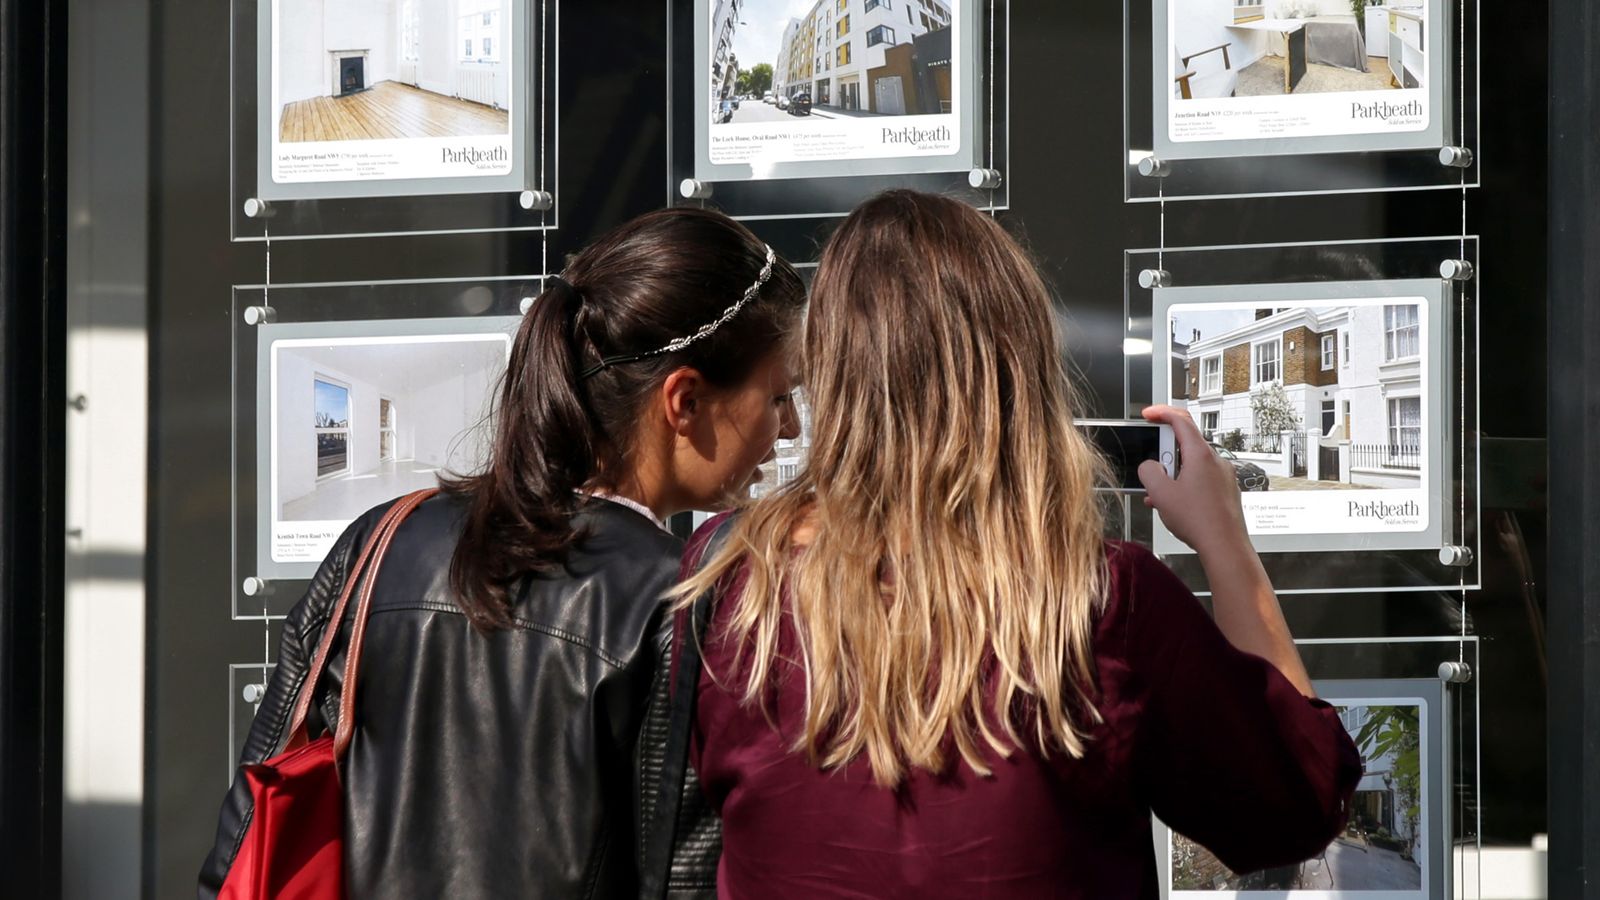 House prices show further growth after pause in interest rate hikes, Nationwide says